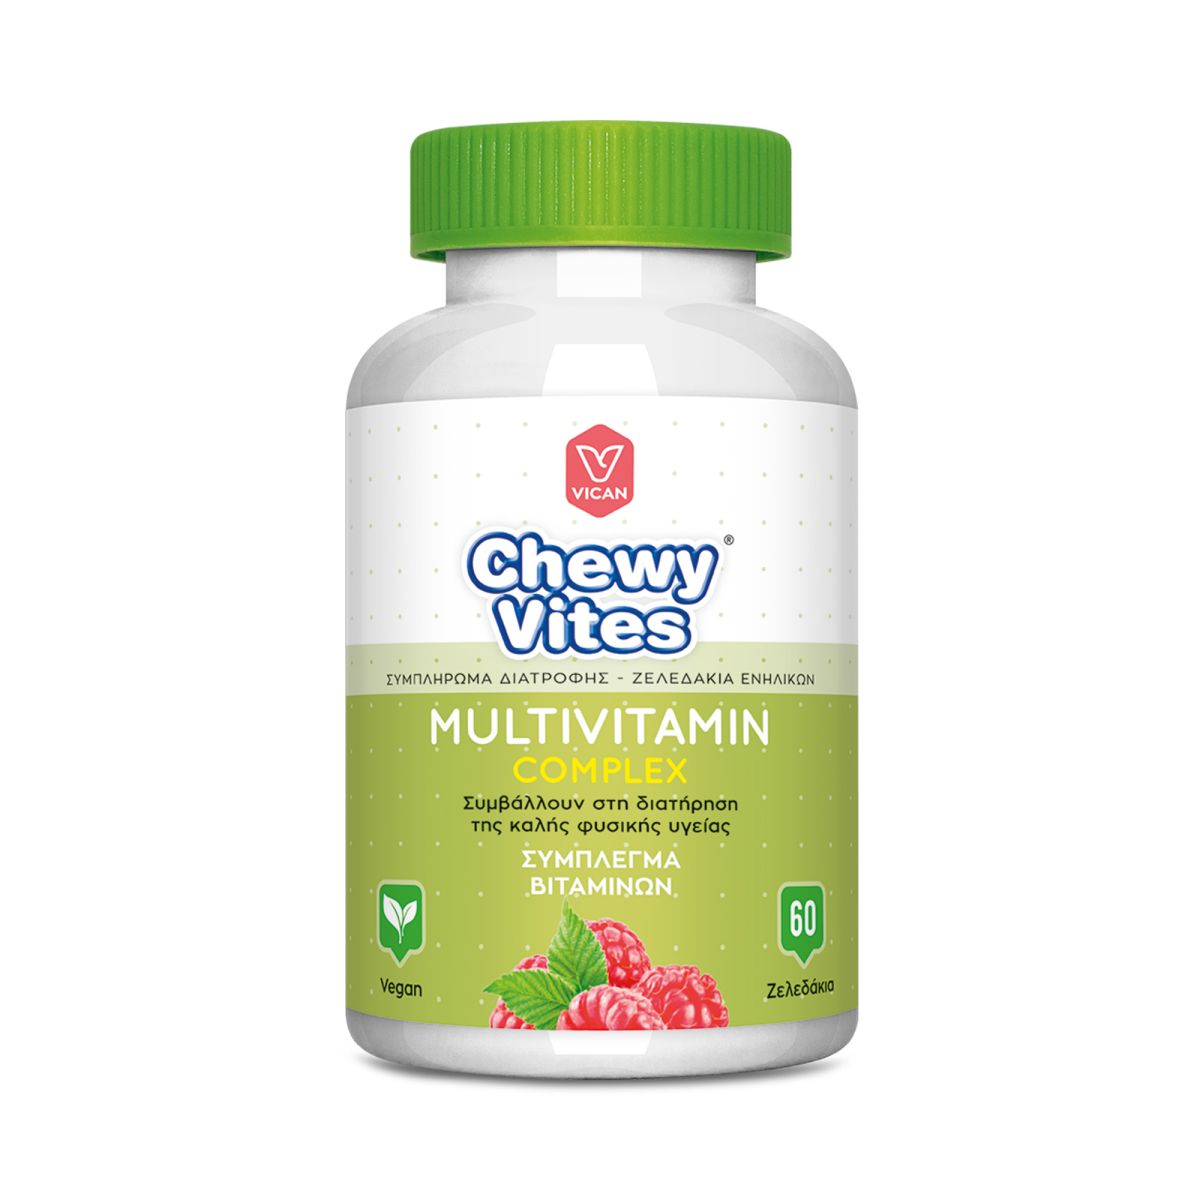 CHEWY VITES ADULTS MULTIVITAMIN COMPLEX